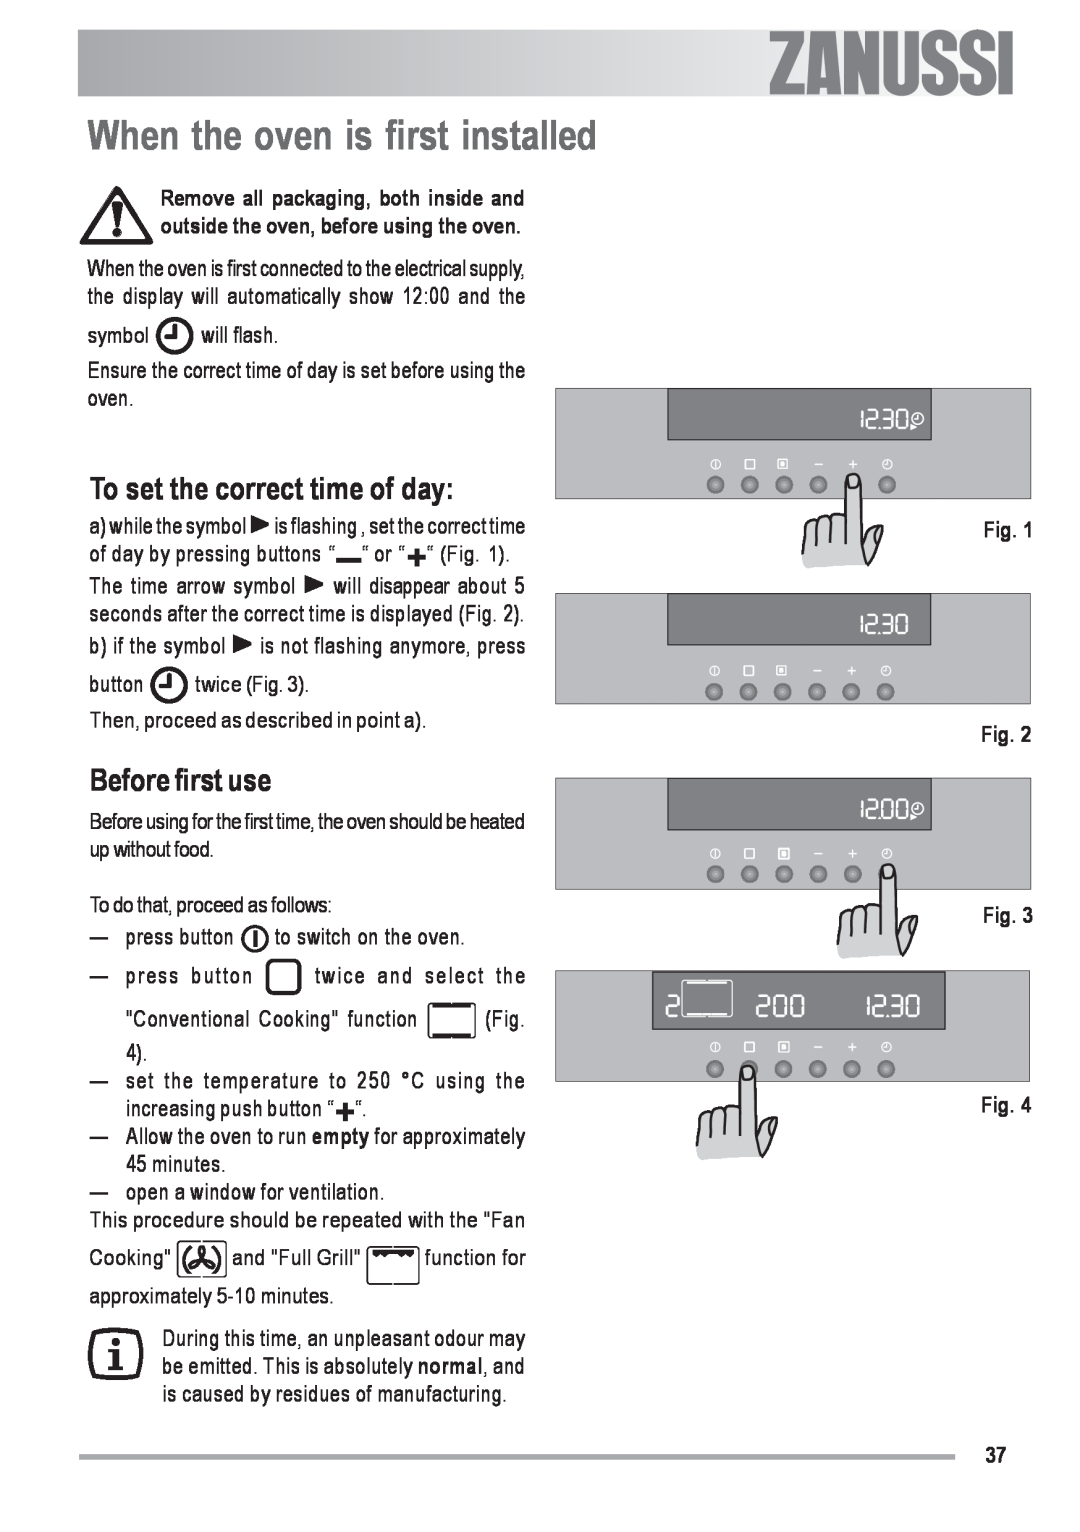 Zanussi ZOU 592 user manual When the oven is first installed, To set the correct time of day, Before first use 